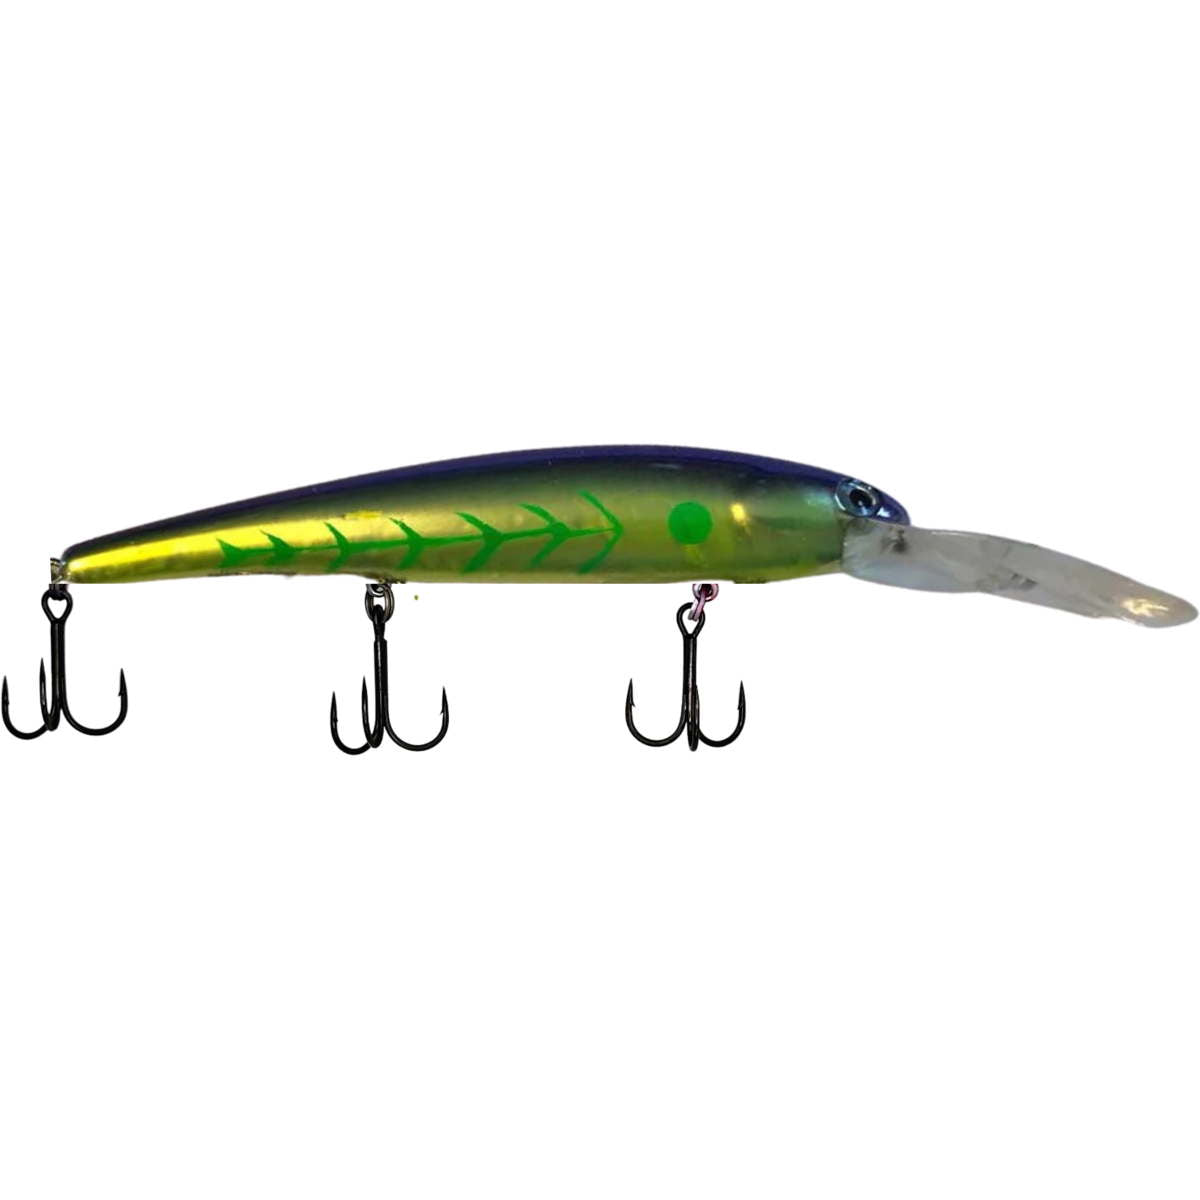 Lot of 20 custom painted Bandit walleye Deep lures - Classifieds - Buy,  Sell, Trade or Rent - Great Lakes Fisherman - Trout, Salmon & Walleye  Fishing Forum